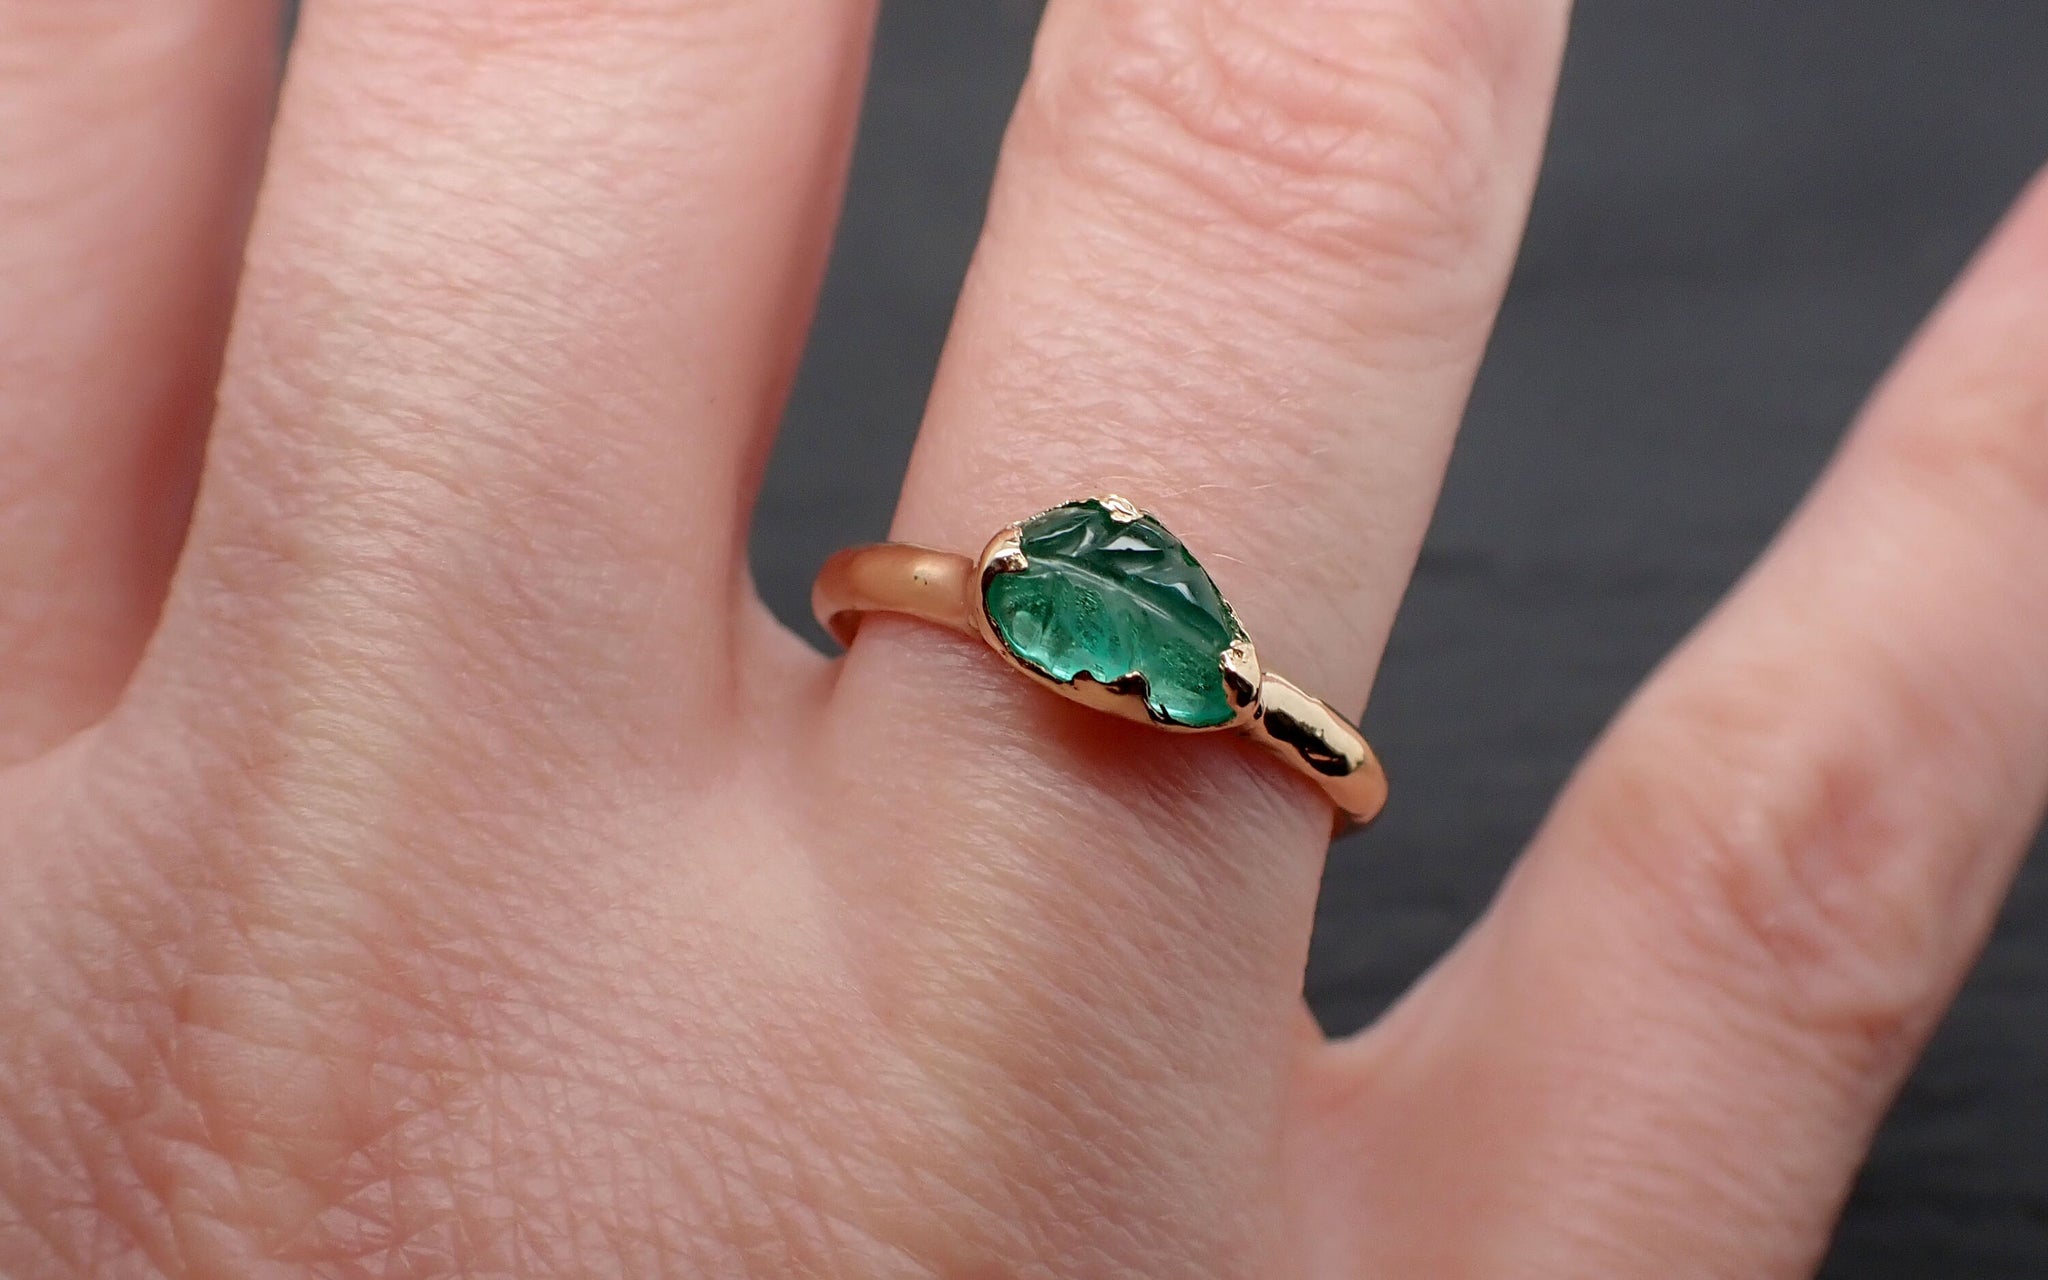 Carved Leaf Emerald Solitaire yellow 14k Gold Ring Birthstone One Of a Kind Gemstone Ring Recycled 3459